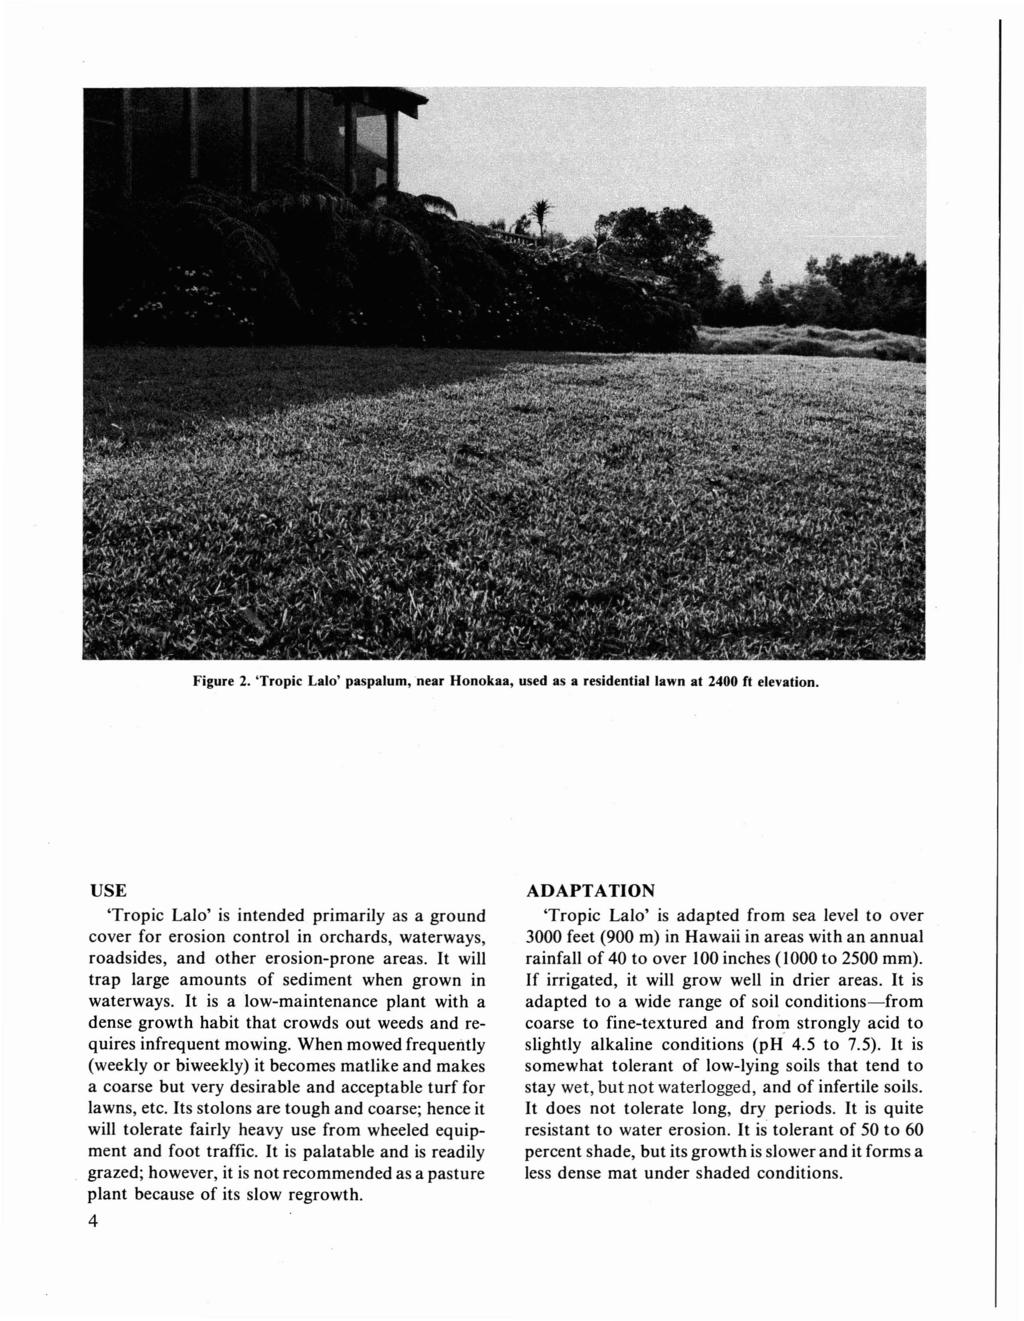 Figure 2. 'Tropic Lalo' paspalum, near Honokaa, used as a residential lawn at 2400 ft elevation.